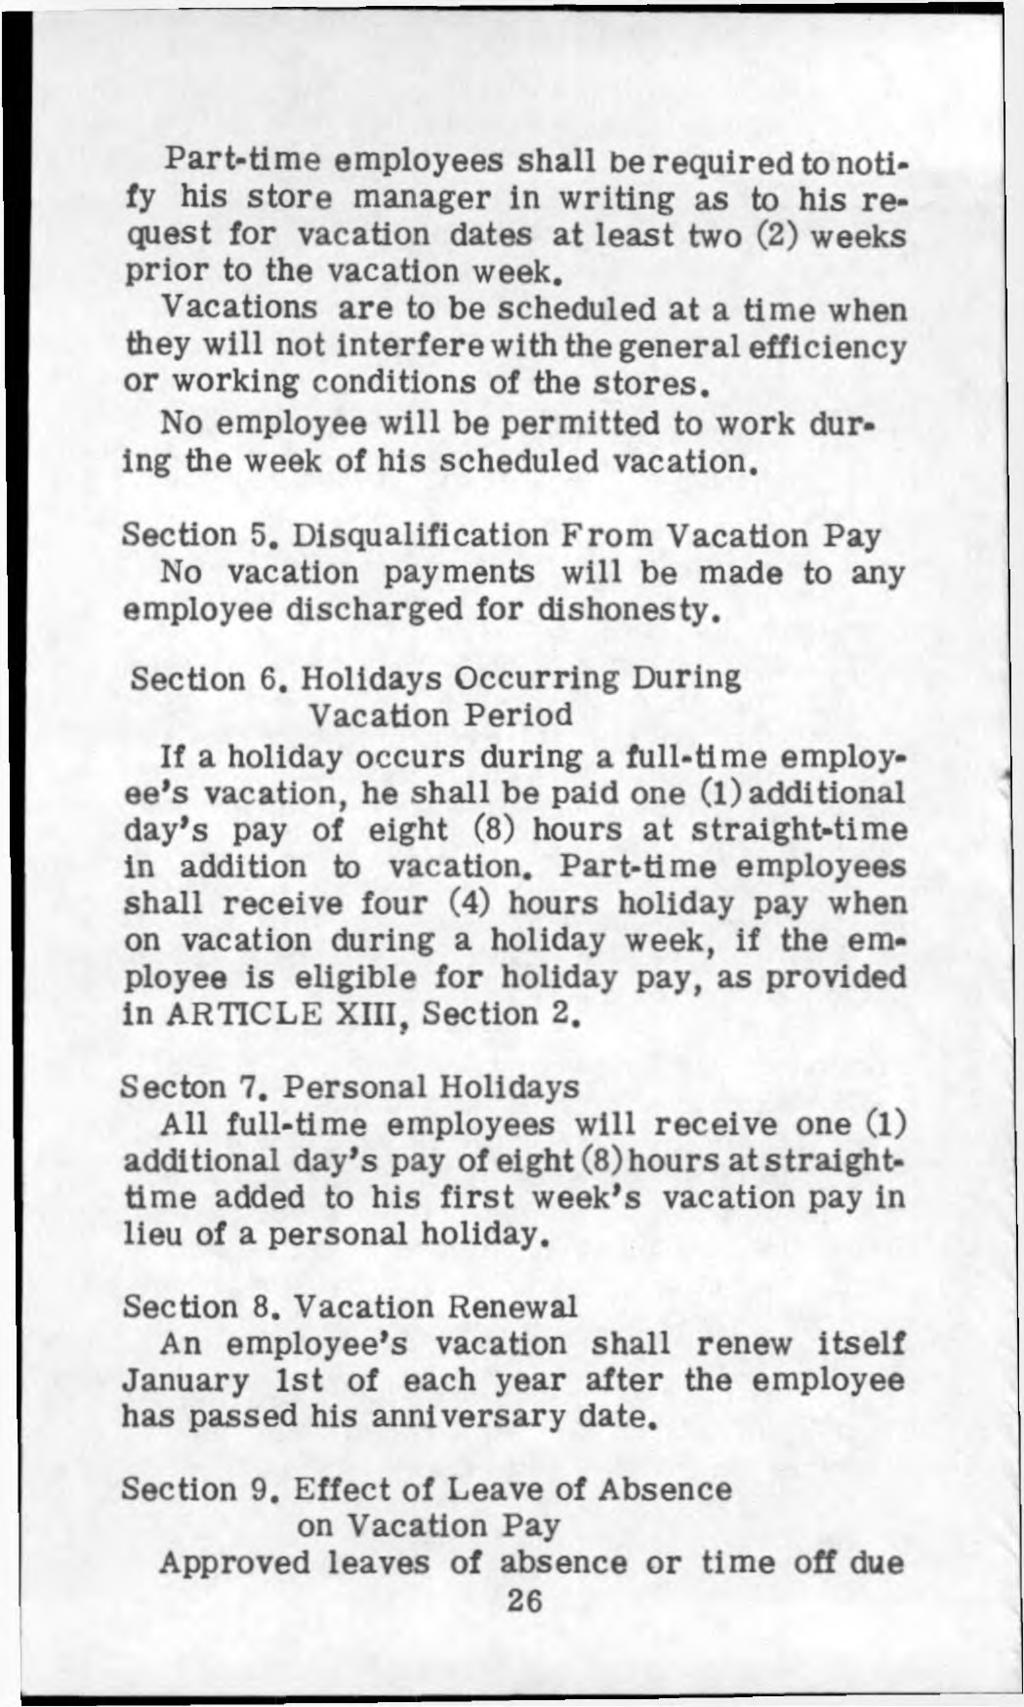 Part-time employees shall be required to notify his store manager in writing as to his request for vacation dates at least two (2) weeks prior to the vacation week.